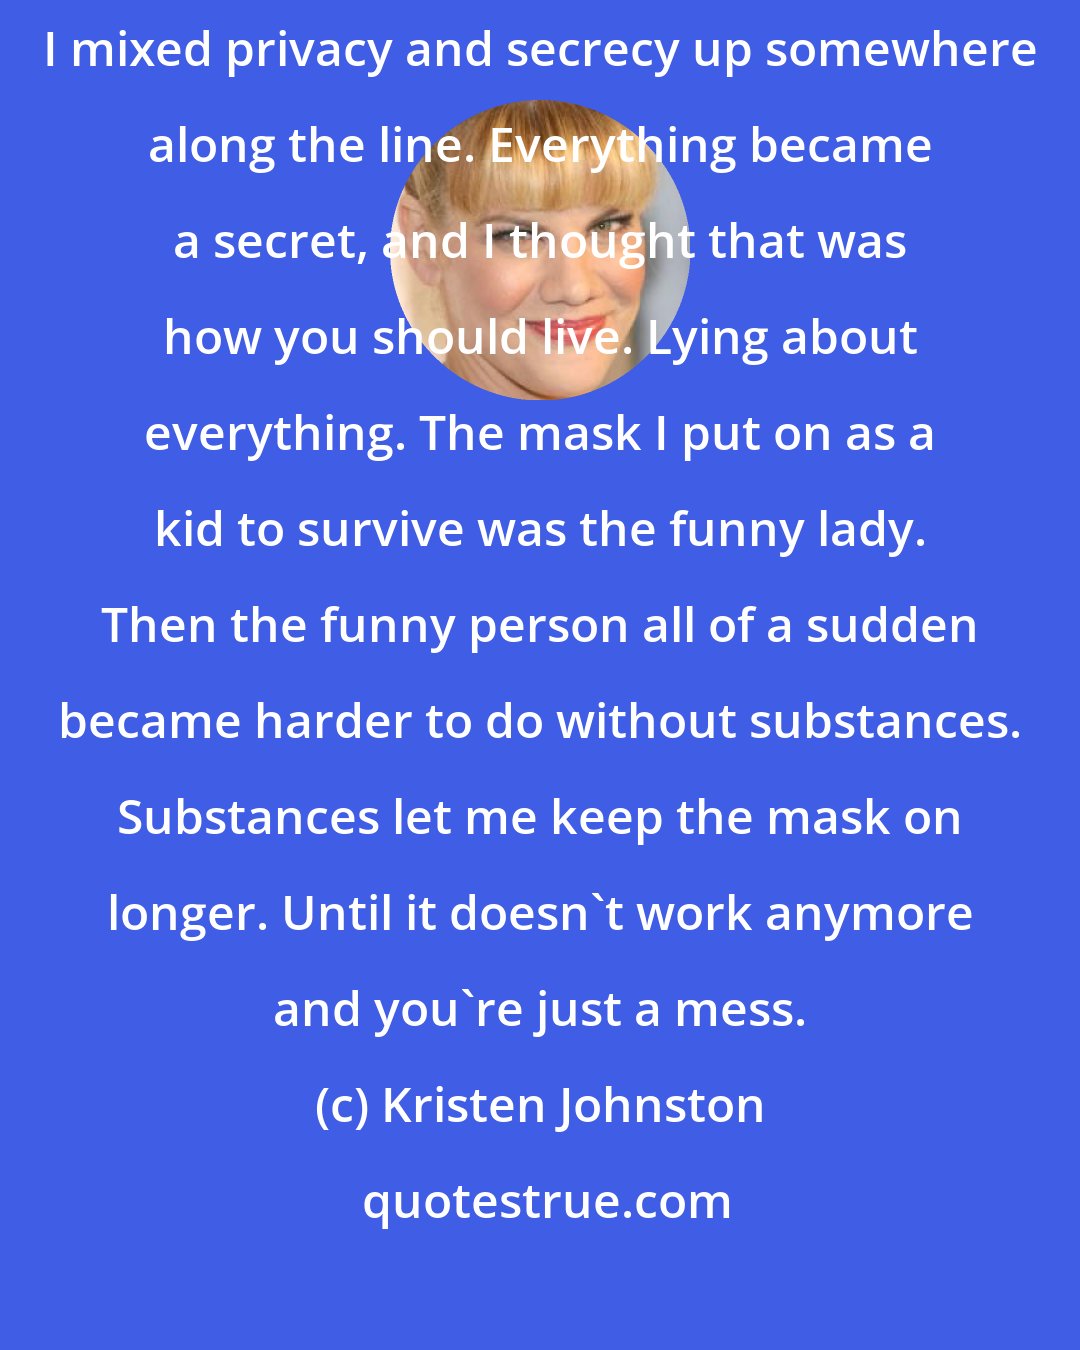 Kristen Johnston: I think it became blurry because I grew up in a very private family. I mixed privacy and secrecy up somewhere along the line. Everything became a secret, and I thought that was how you should live. Lying about everything. The mask I put on as a kid to survive was the funny lady. Then the funny person all of a sudden became harder to do without substances. Substances let me keep the mask on longer. Until it doesn't work anymore and you're just a mess.